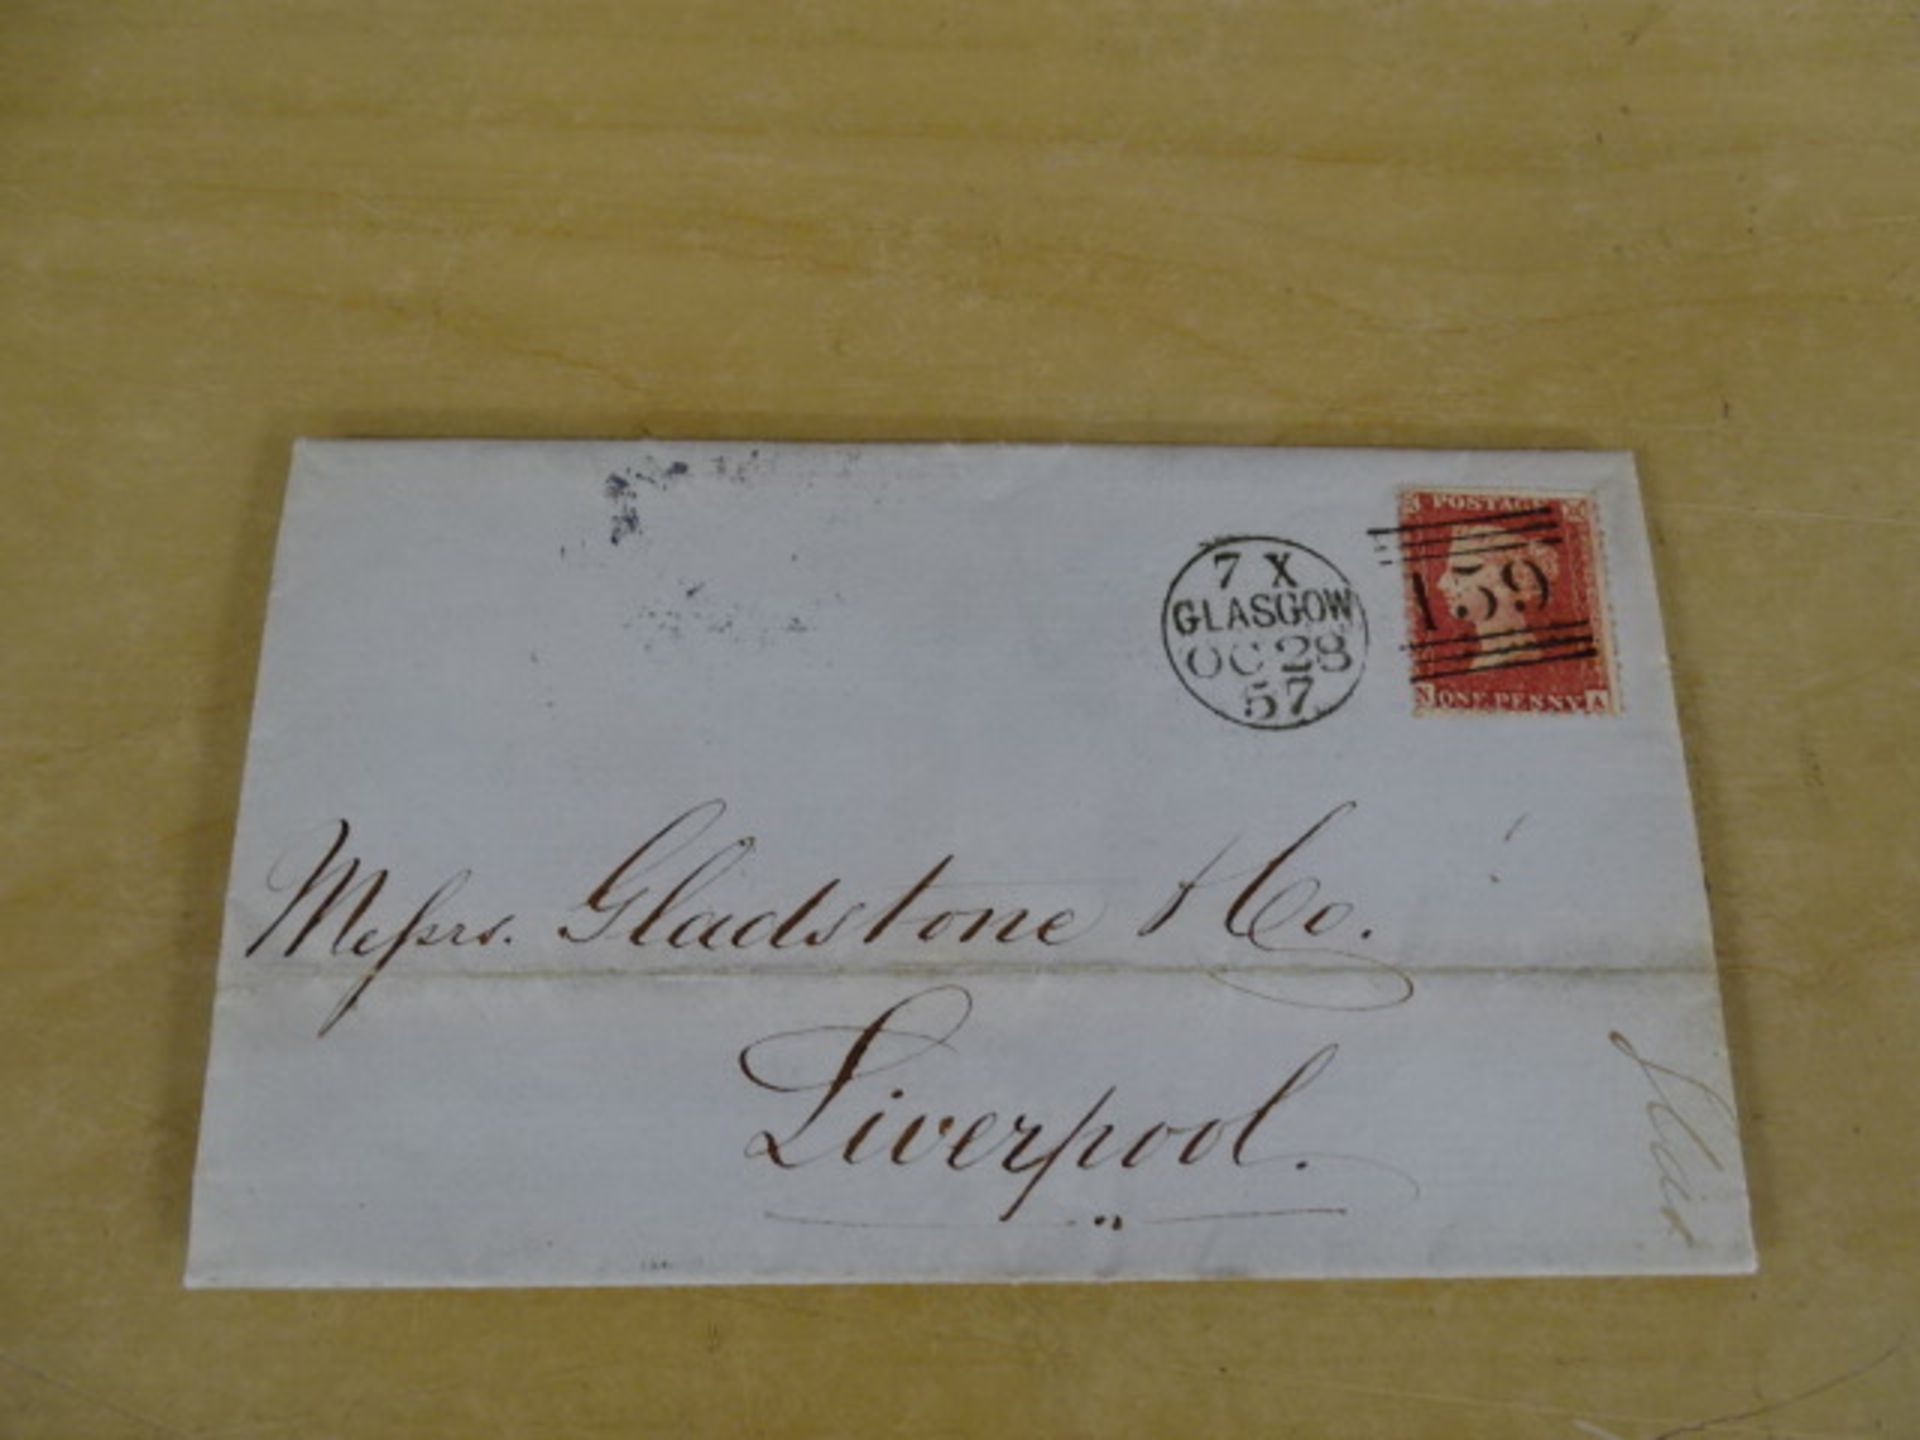 An entire cover with unbroken wax seal from Glasgow to Liverpool 1857 with penny red stamp